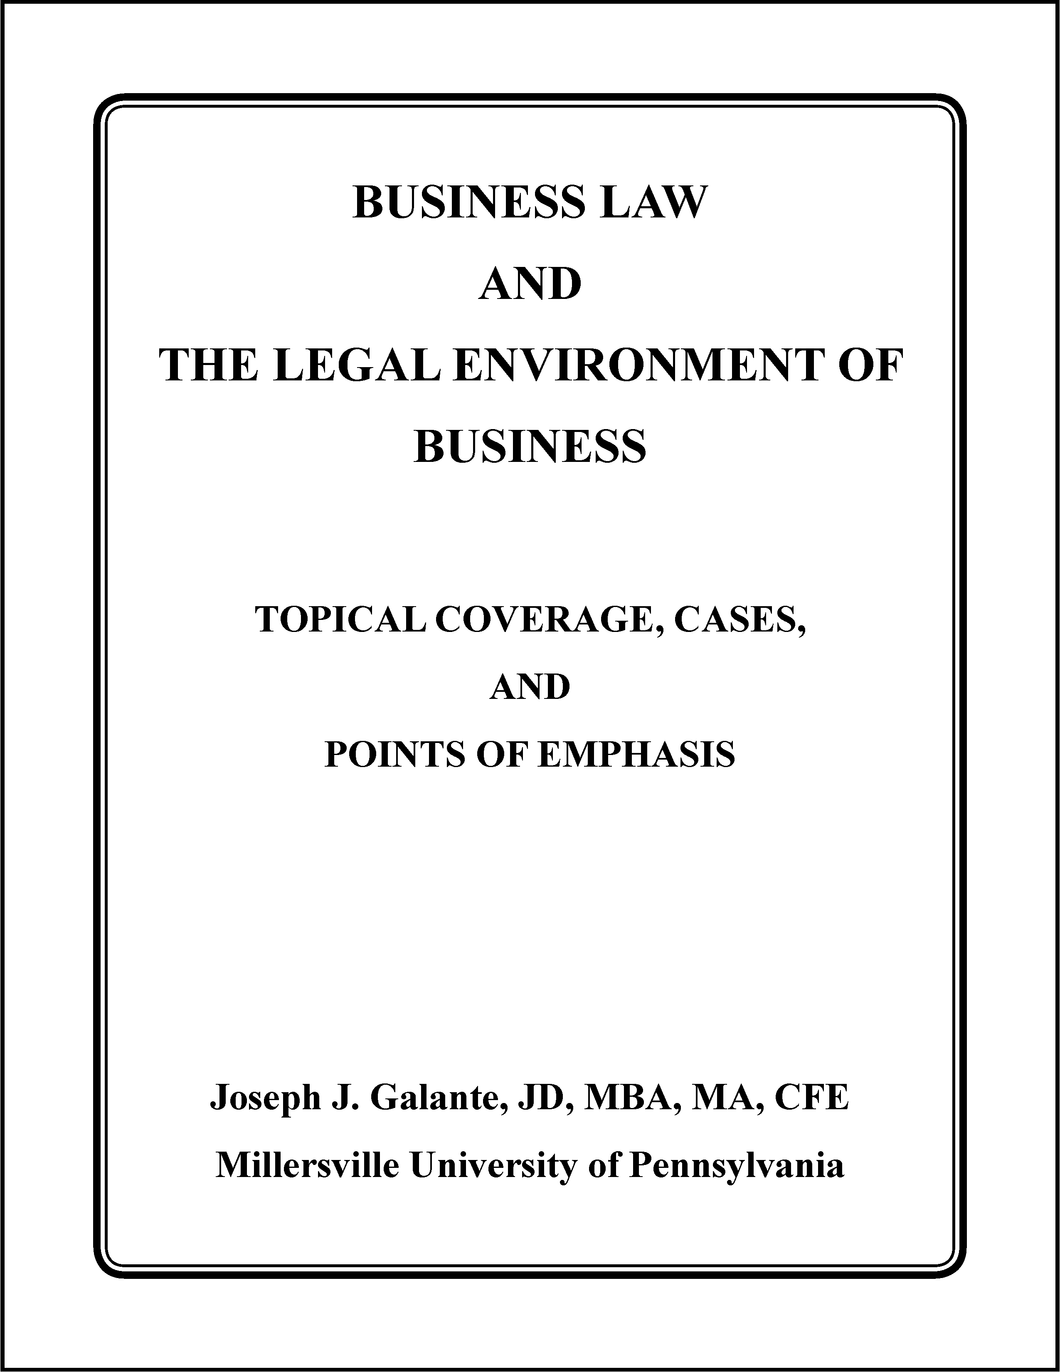 Buisness Law and The Legal Environment of Business - Topical Coverage, Cases, & Points of Interest